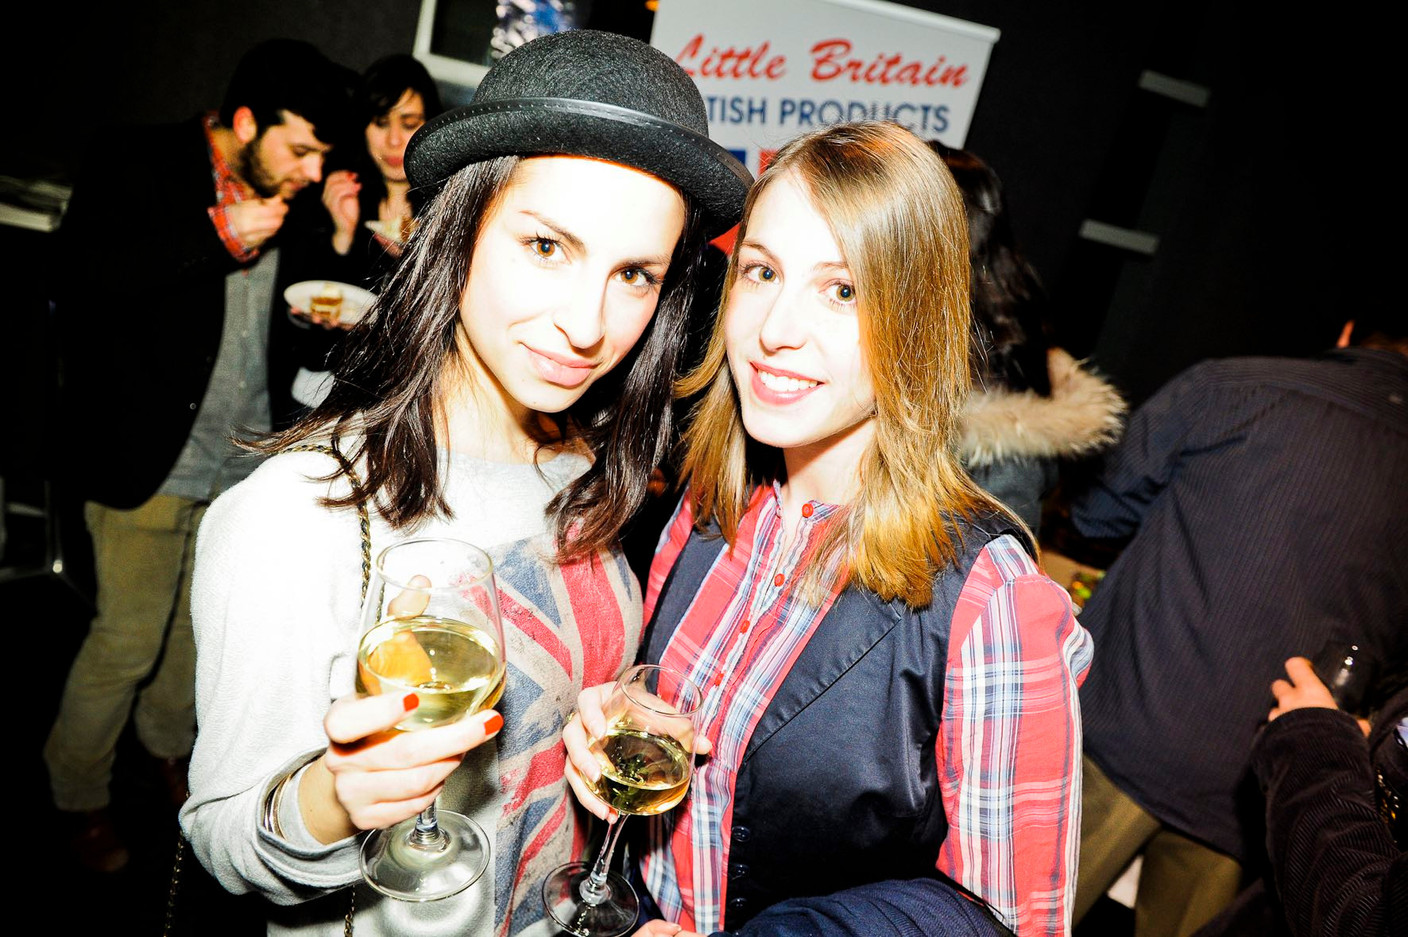 2012: Aysen Calli and Irene De Muur are seen during Delano’s UK-themed 1st anniversary party, “London Calling”, at Marx Bar. Maison Moderne archives